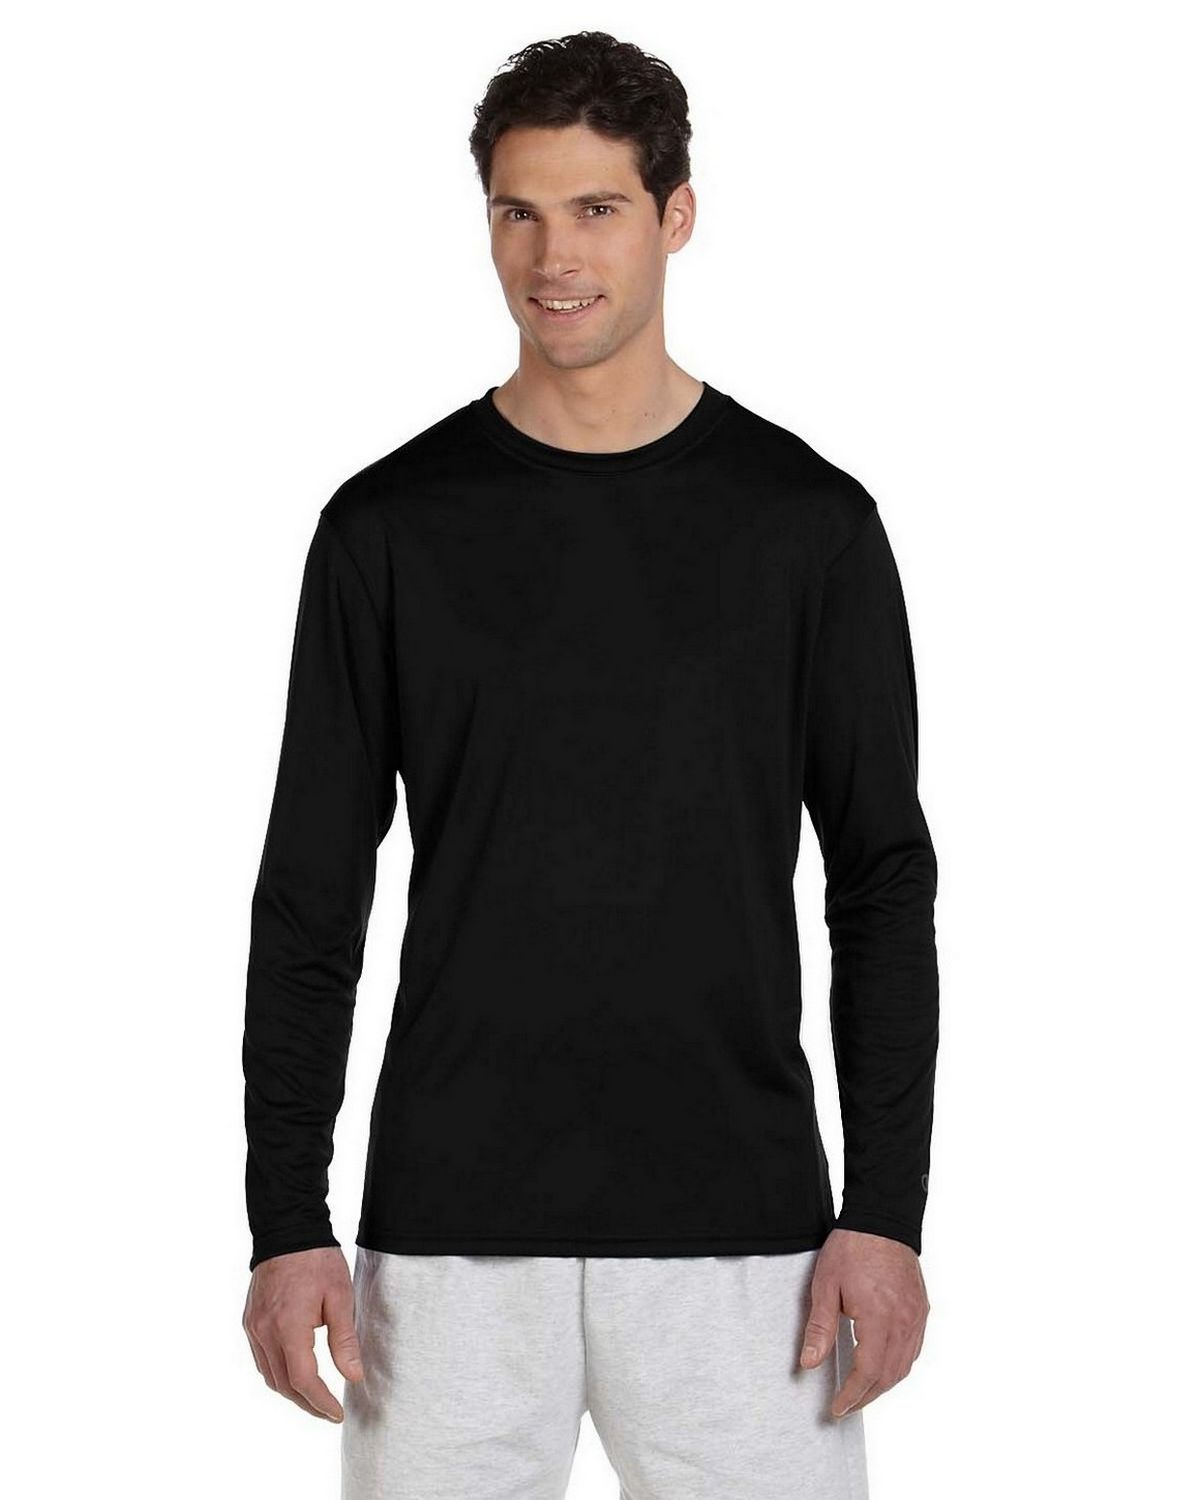 Double Dry Performance Long Sleeve T Shirt